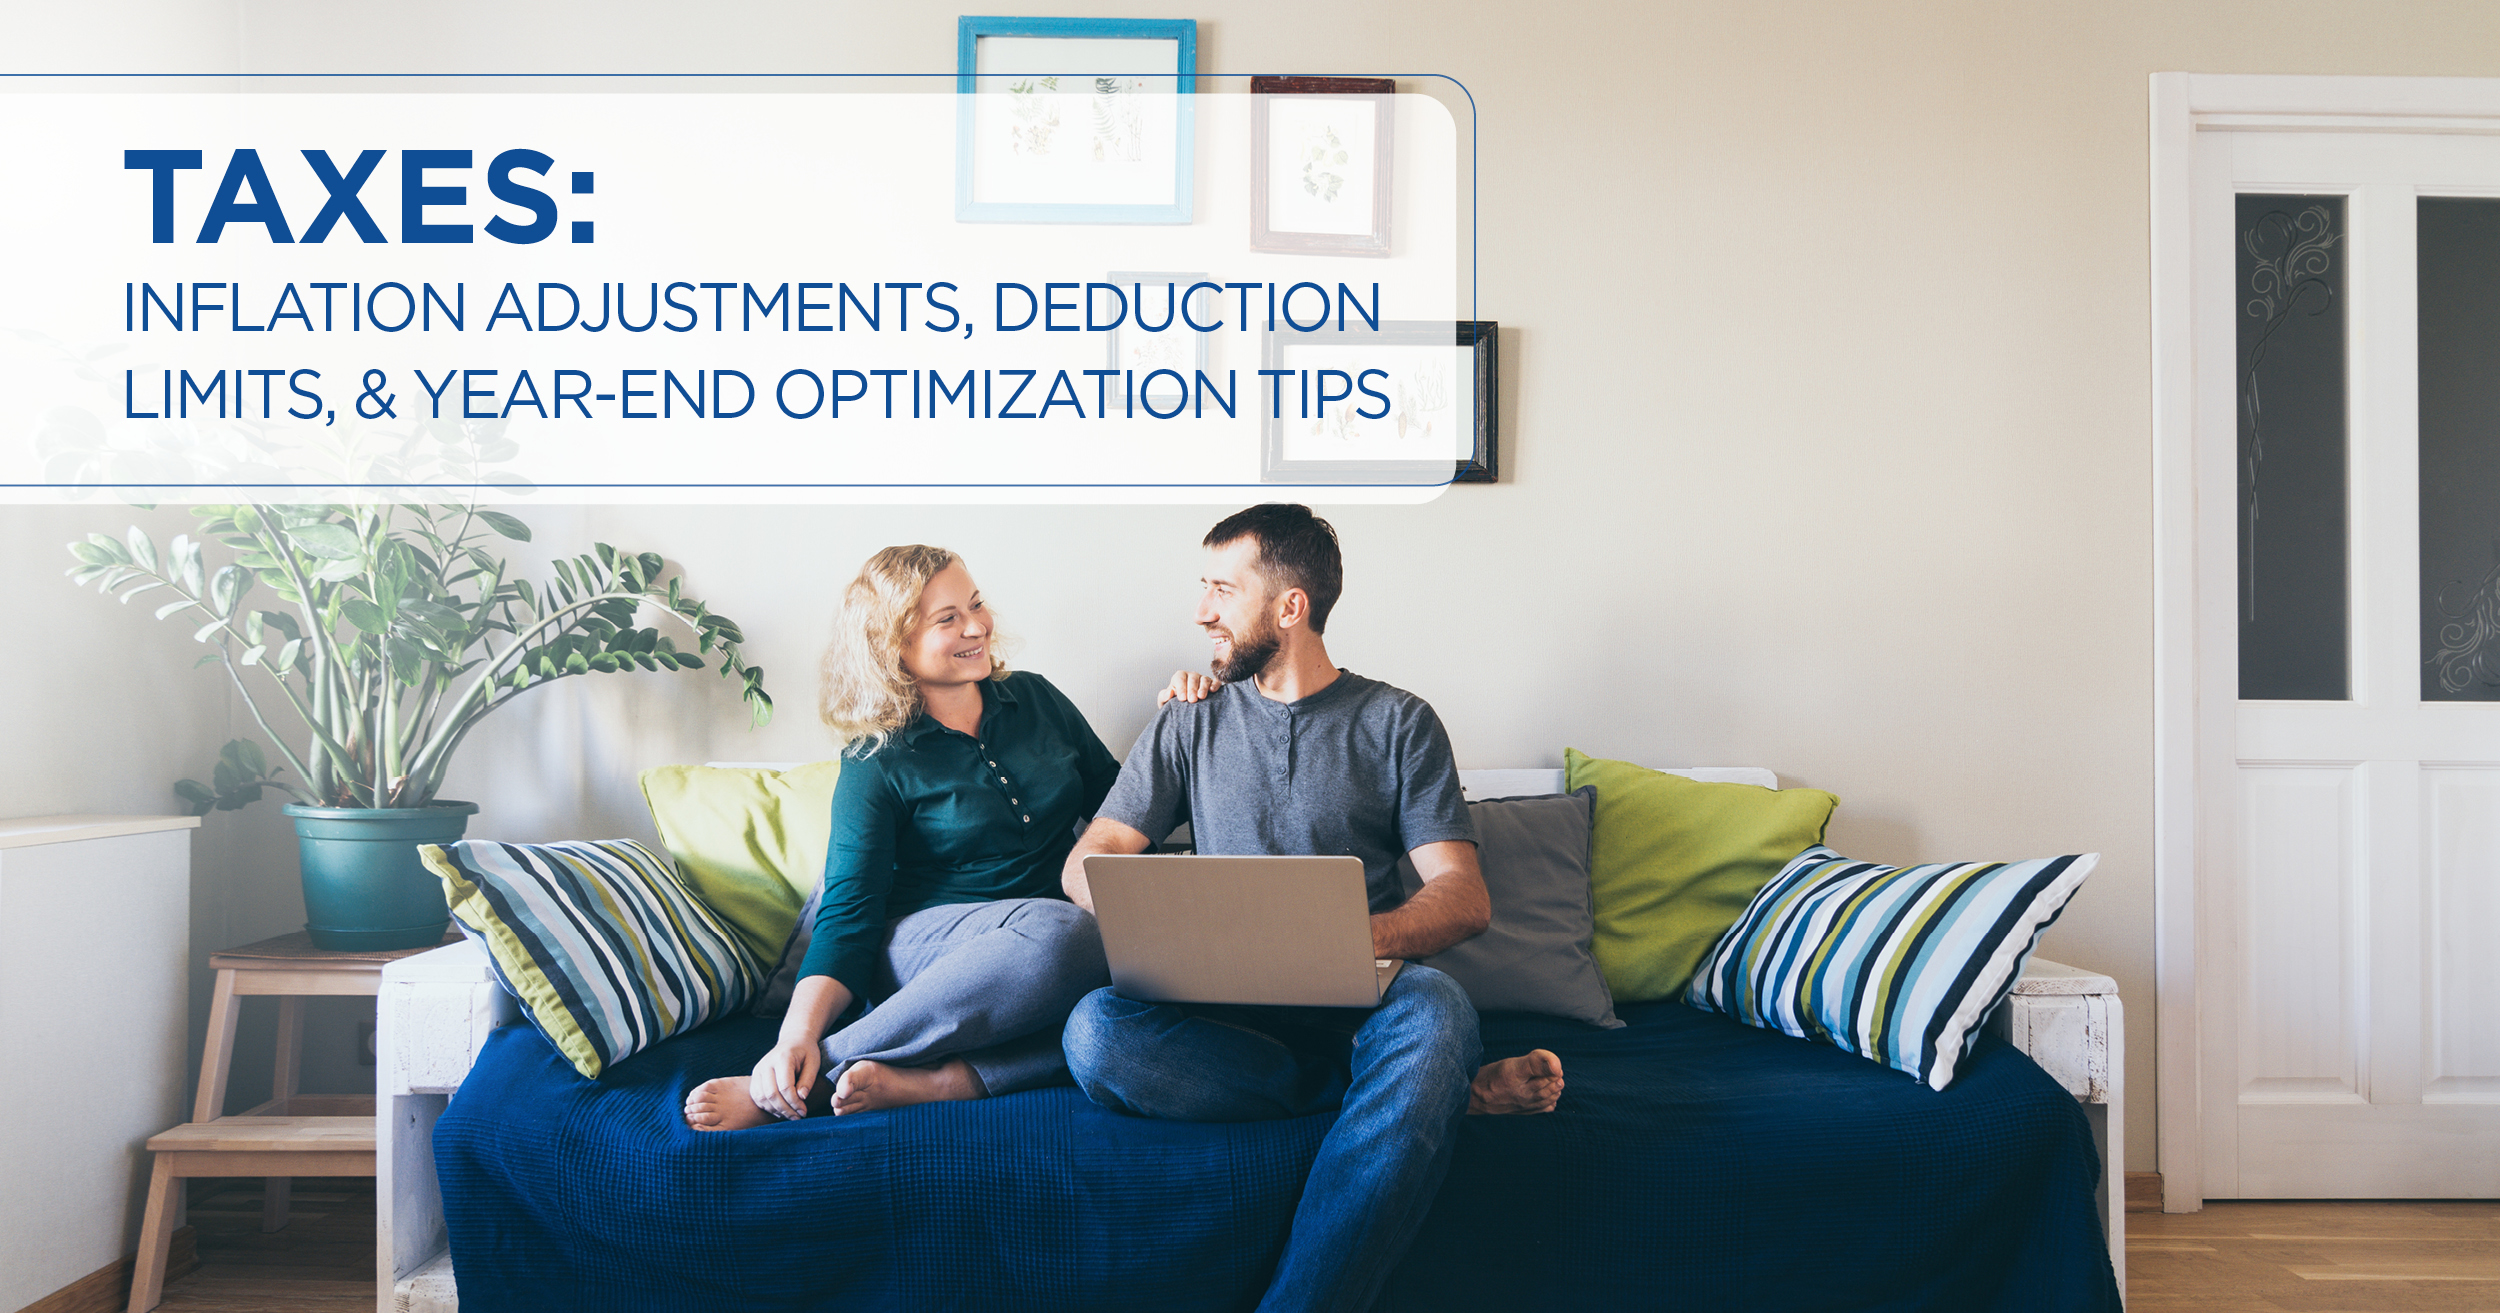 TAXES: INFLATION ADJUSTMENTS, DEDUCTION LIMITS, AND OPTIMIZATION TIPS